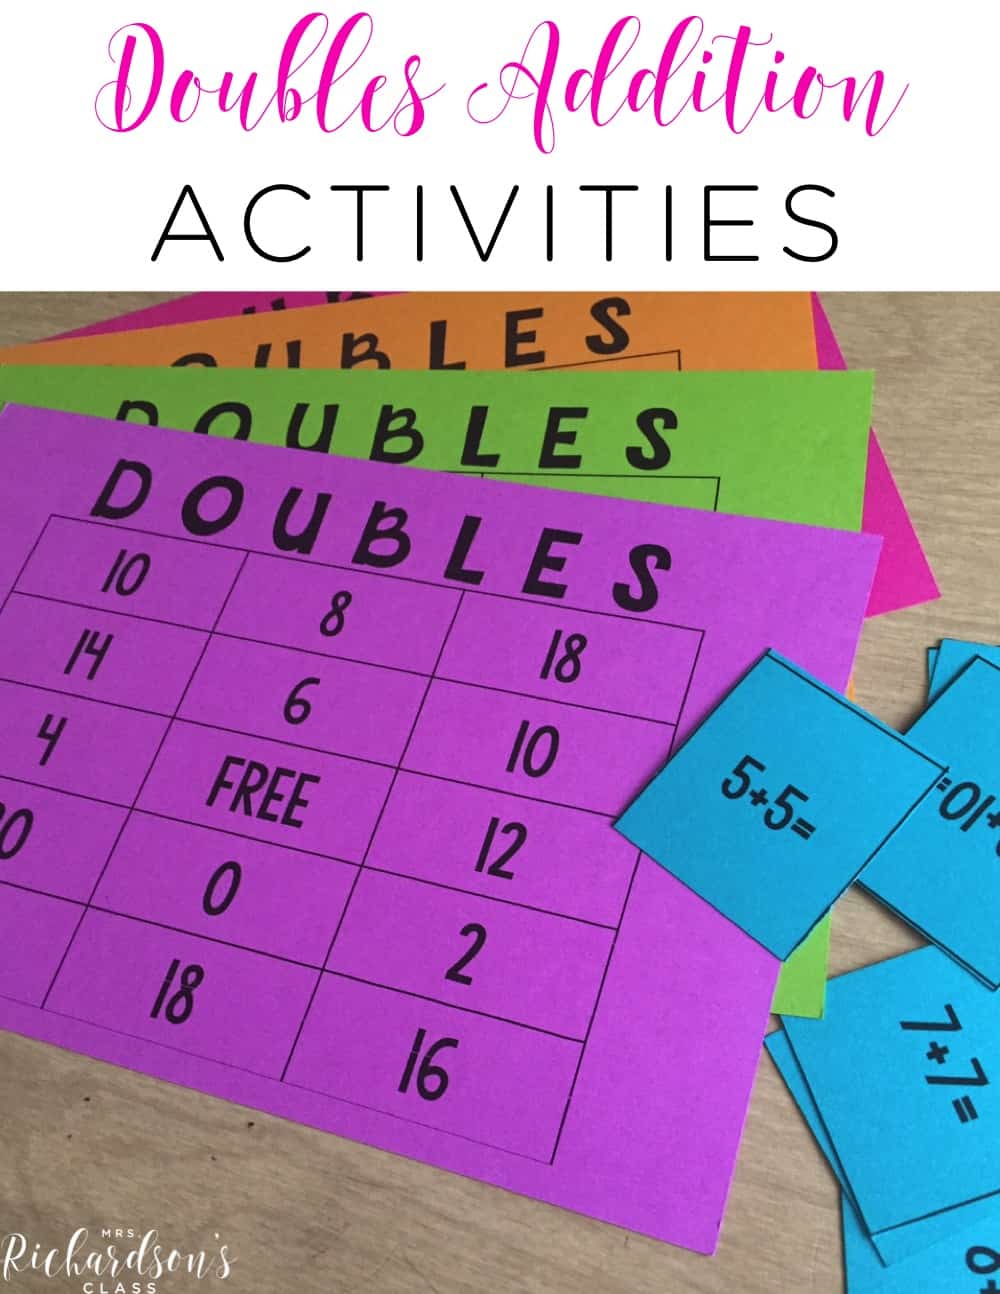 Doubles Addition Teaching Ideas that are great for first graders! I love the song that this teacher shared, too! Don't forget to grab the FREEBIE in the post! #firstgrade #freebie 